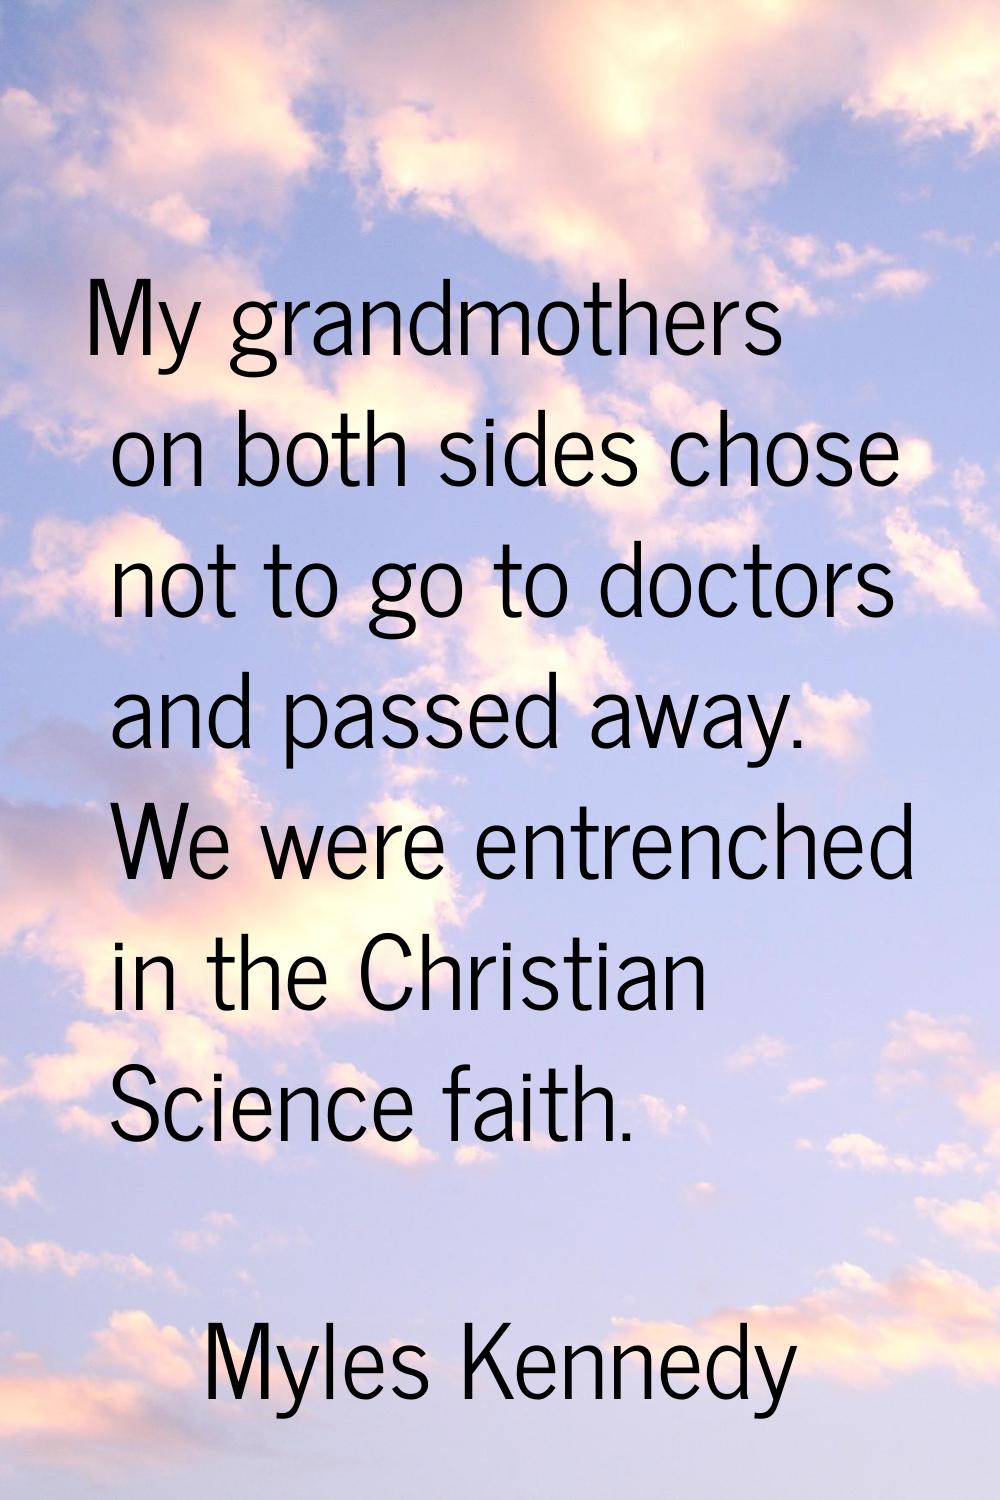 My grandmothers on both sides chose not to go to doctors and passed away. We were entrenched in the